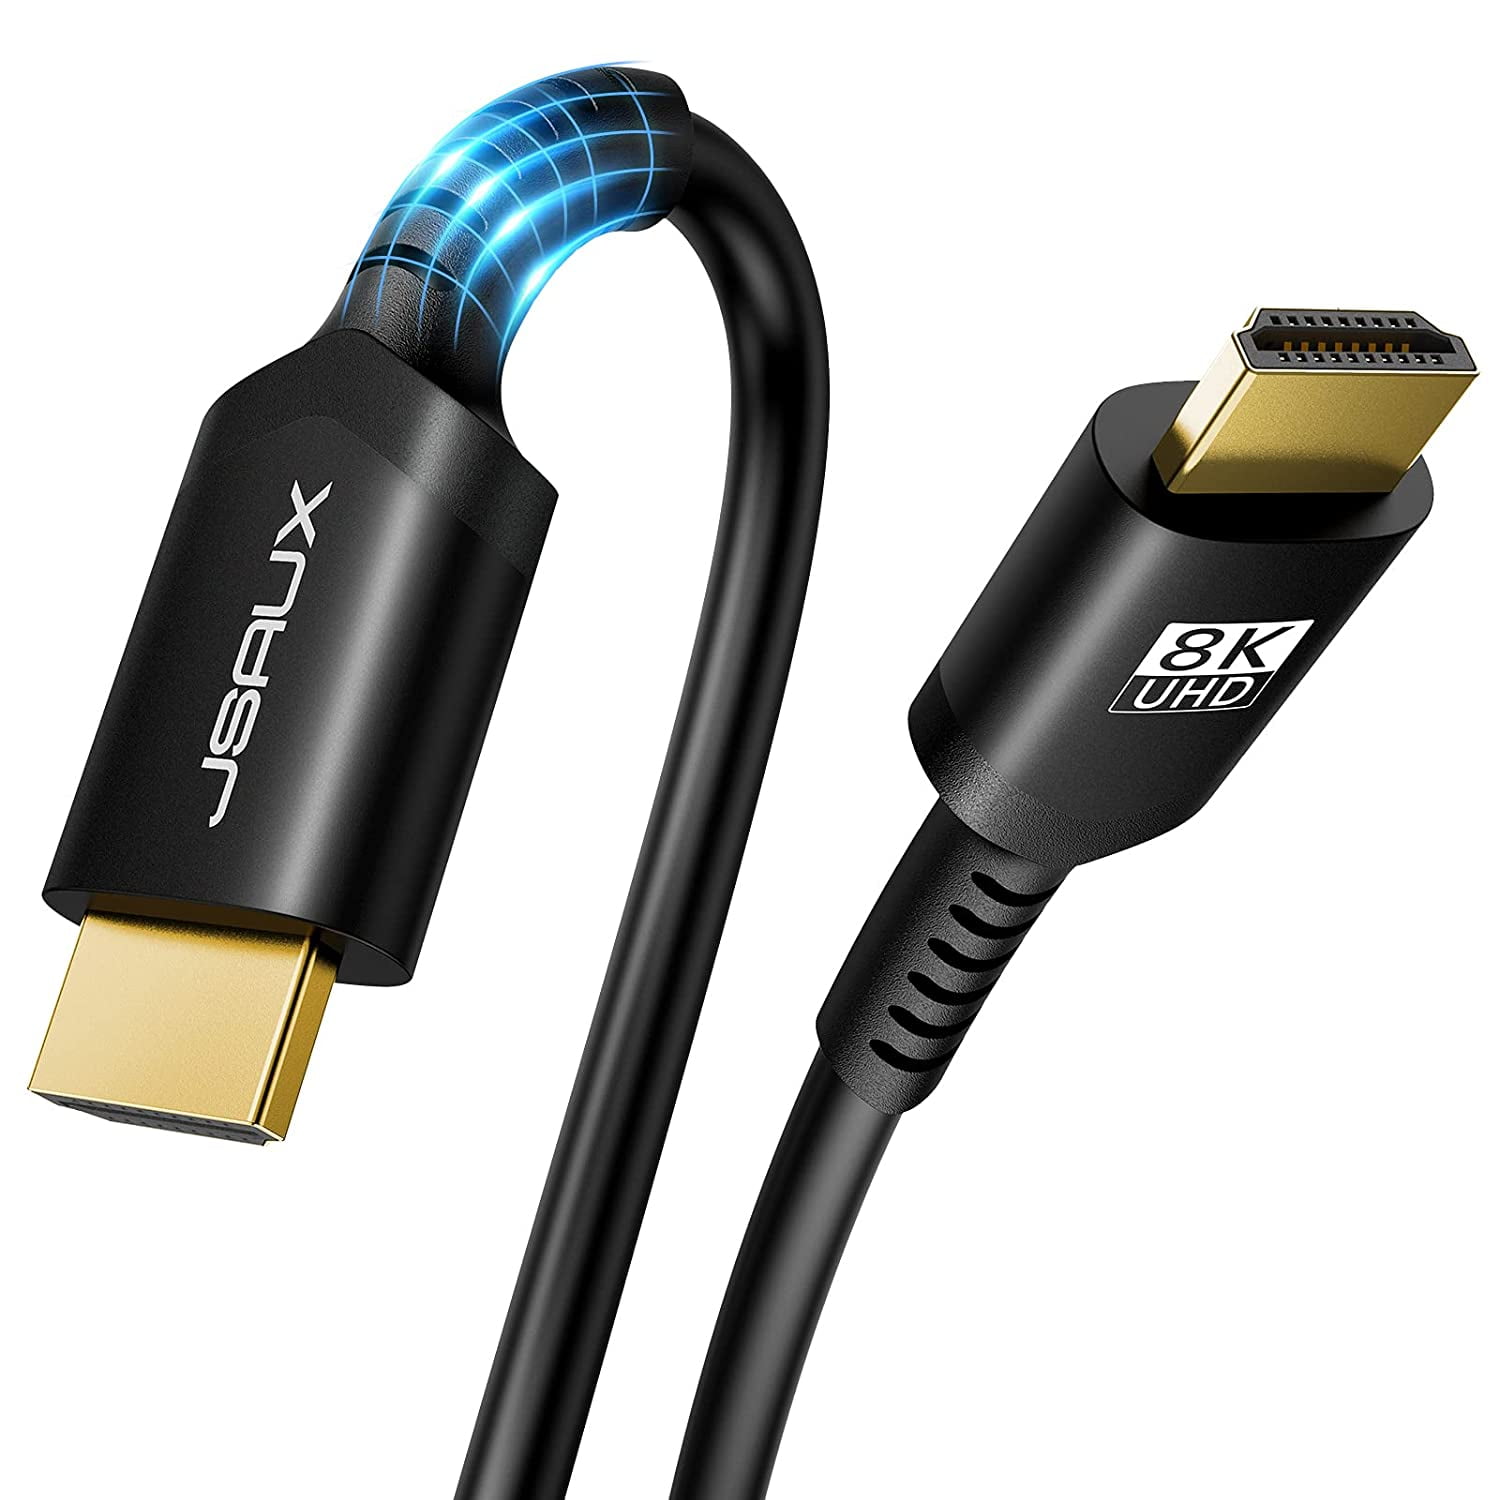 8K HDMI Cable 10ft, JSAUX 48Gbps Ultra High Speed Cord Support 4K@120Hz 8K@60Hz eARC HDR10+ HDCP 2.2&2.3 DTS:X 3D Dolby Compatible with 8K Gaming PS4 Pro PS5 TV Projektor Blu-ray -